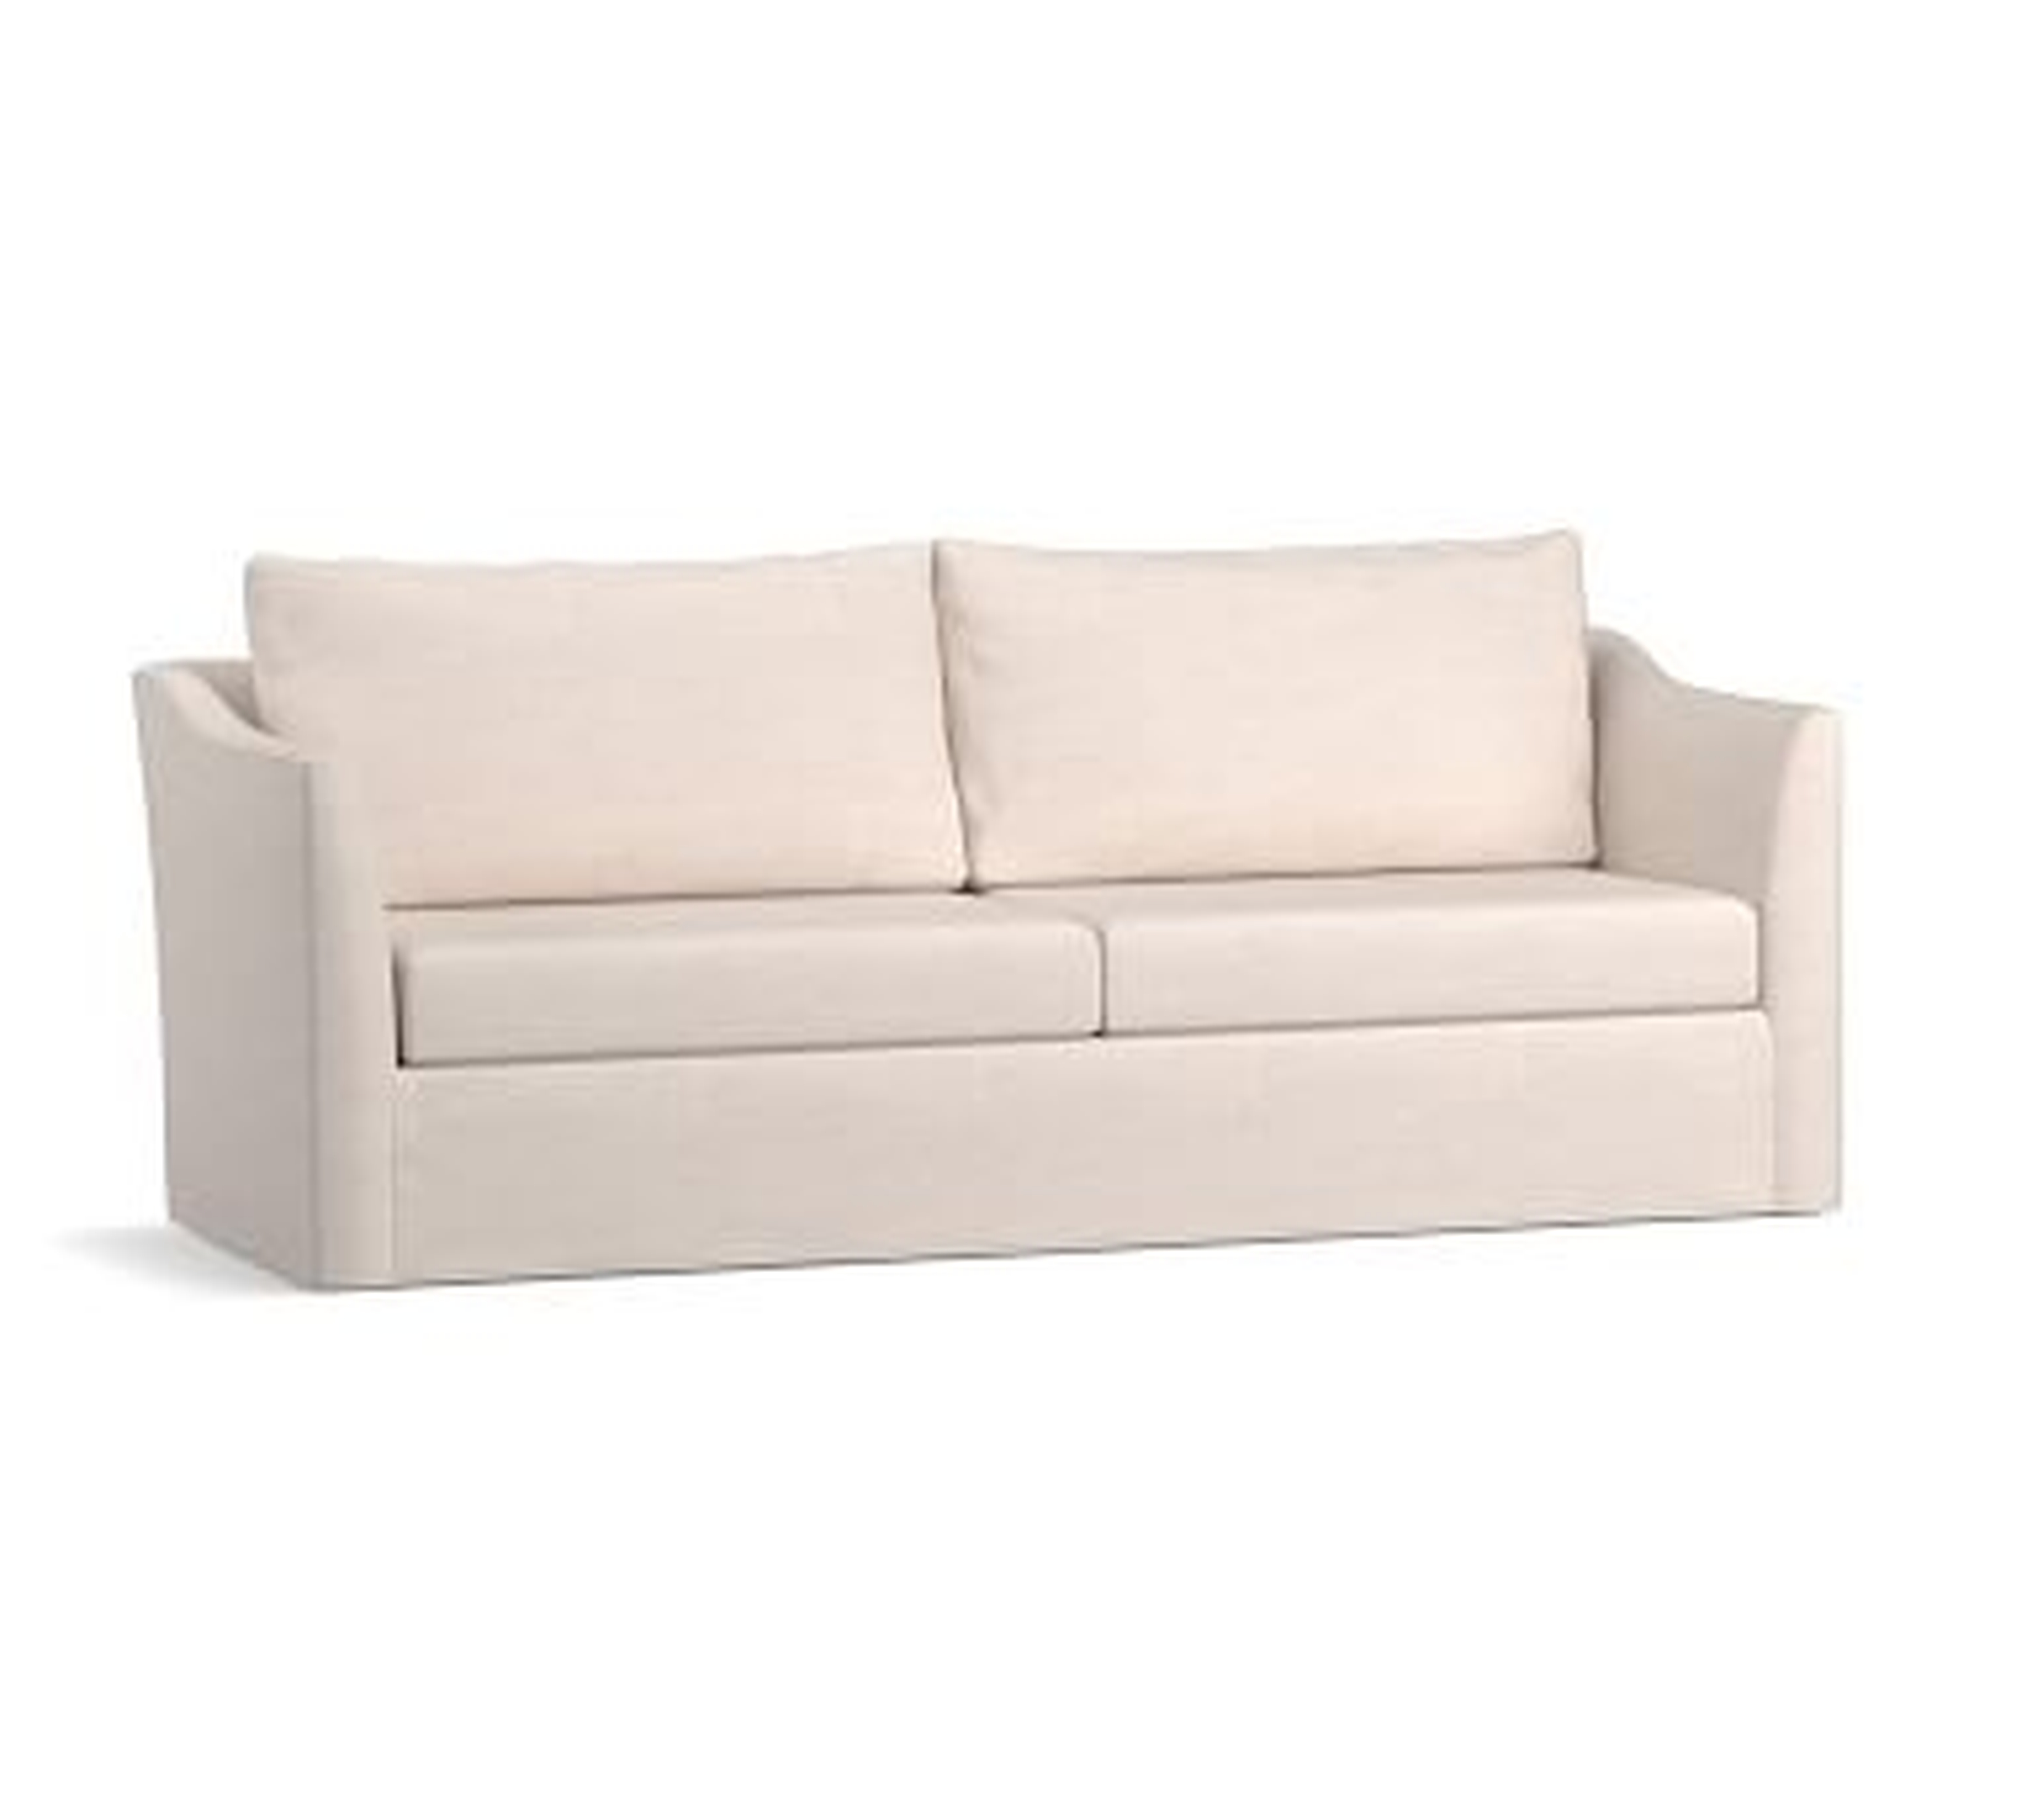 Celeste Slipcovered Loveseat 66", Polyester Wrapped Cushions, Brushed Canvas Natural - Pottery Barn